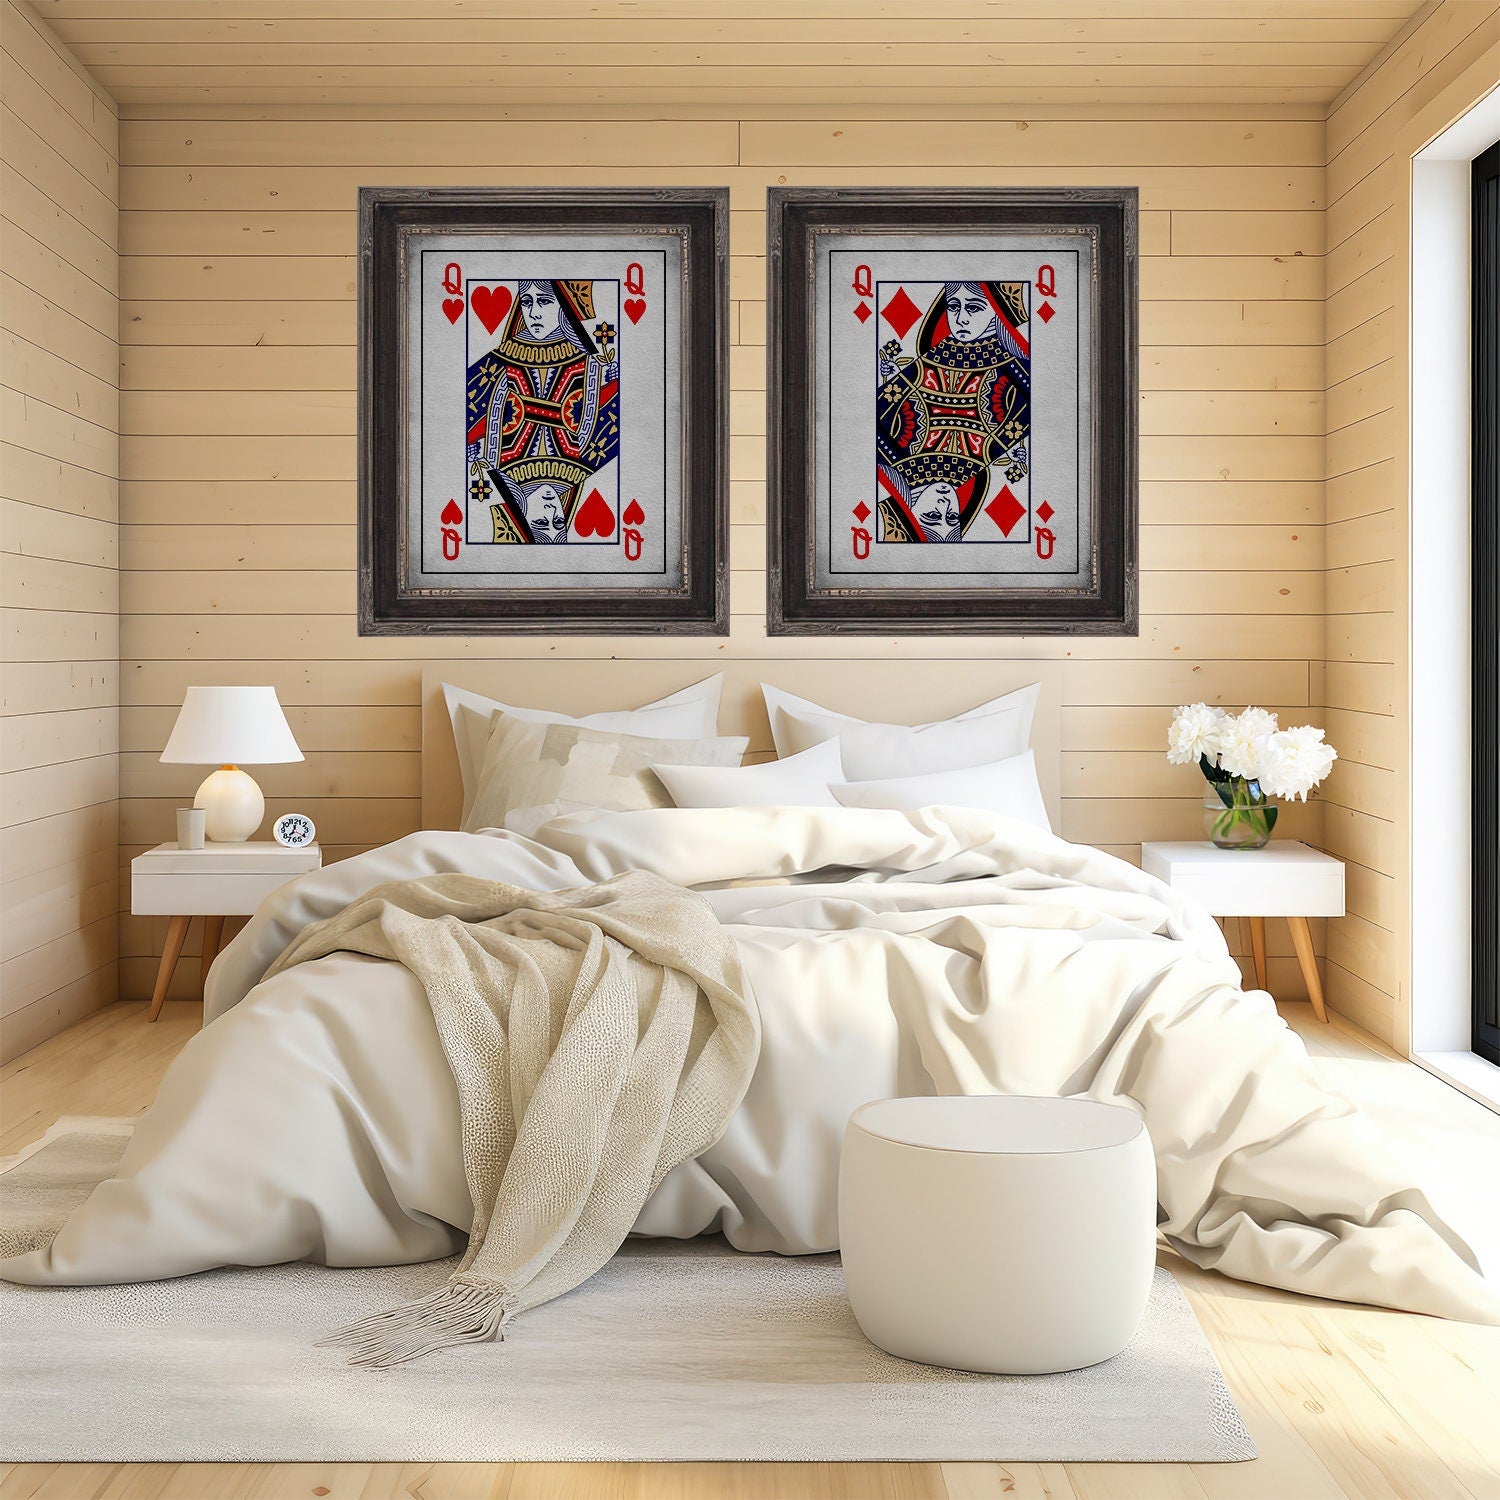 Queen of Hearts and Queen of Diamonds Playing Card Art Prints - LBTGQ Poker Card Posters at Adirondack Retro